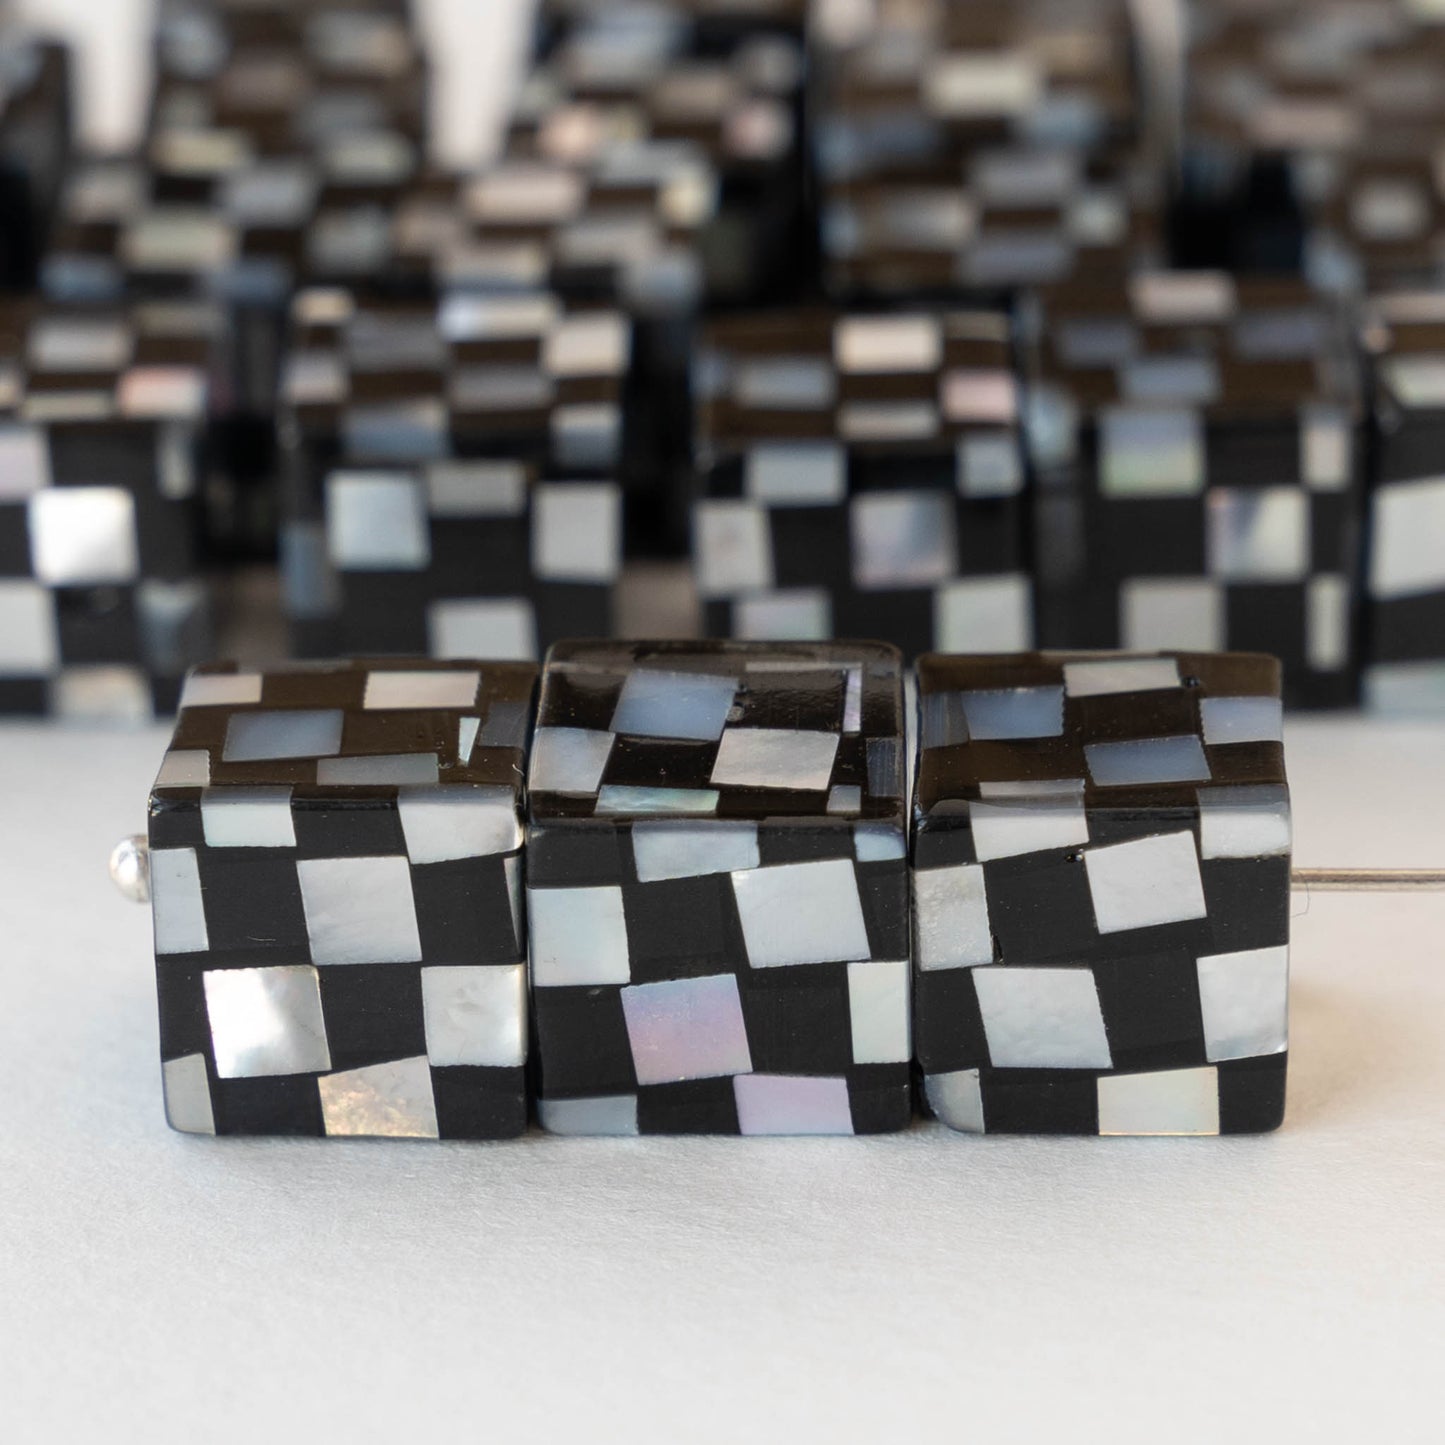 Mother of Pearl Mosaic Cube Beads - 2 Cubes